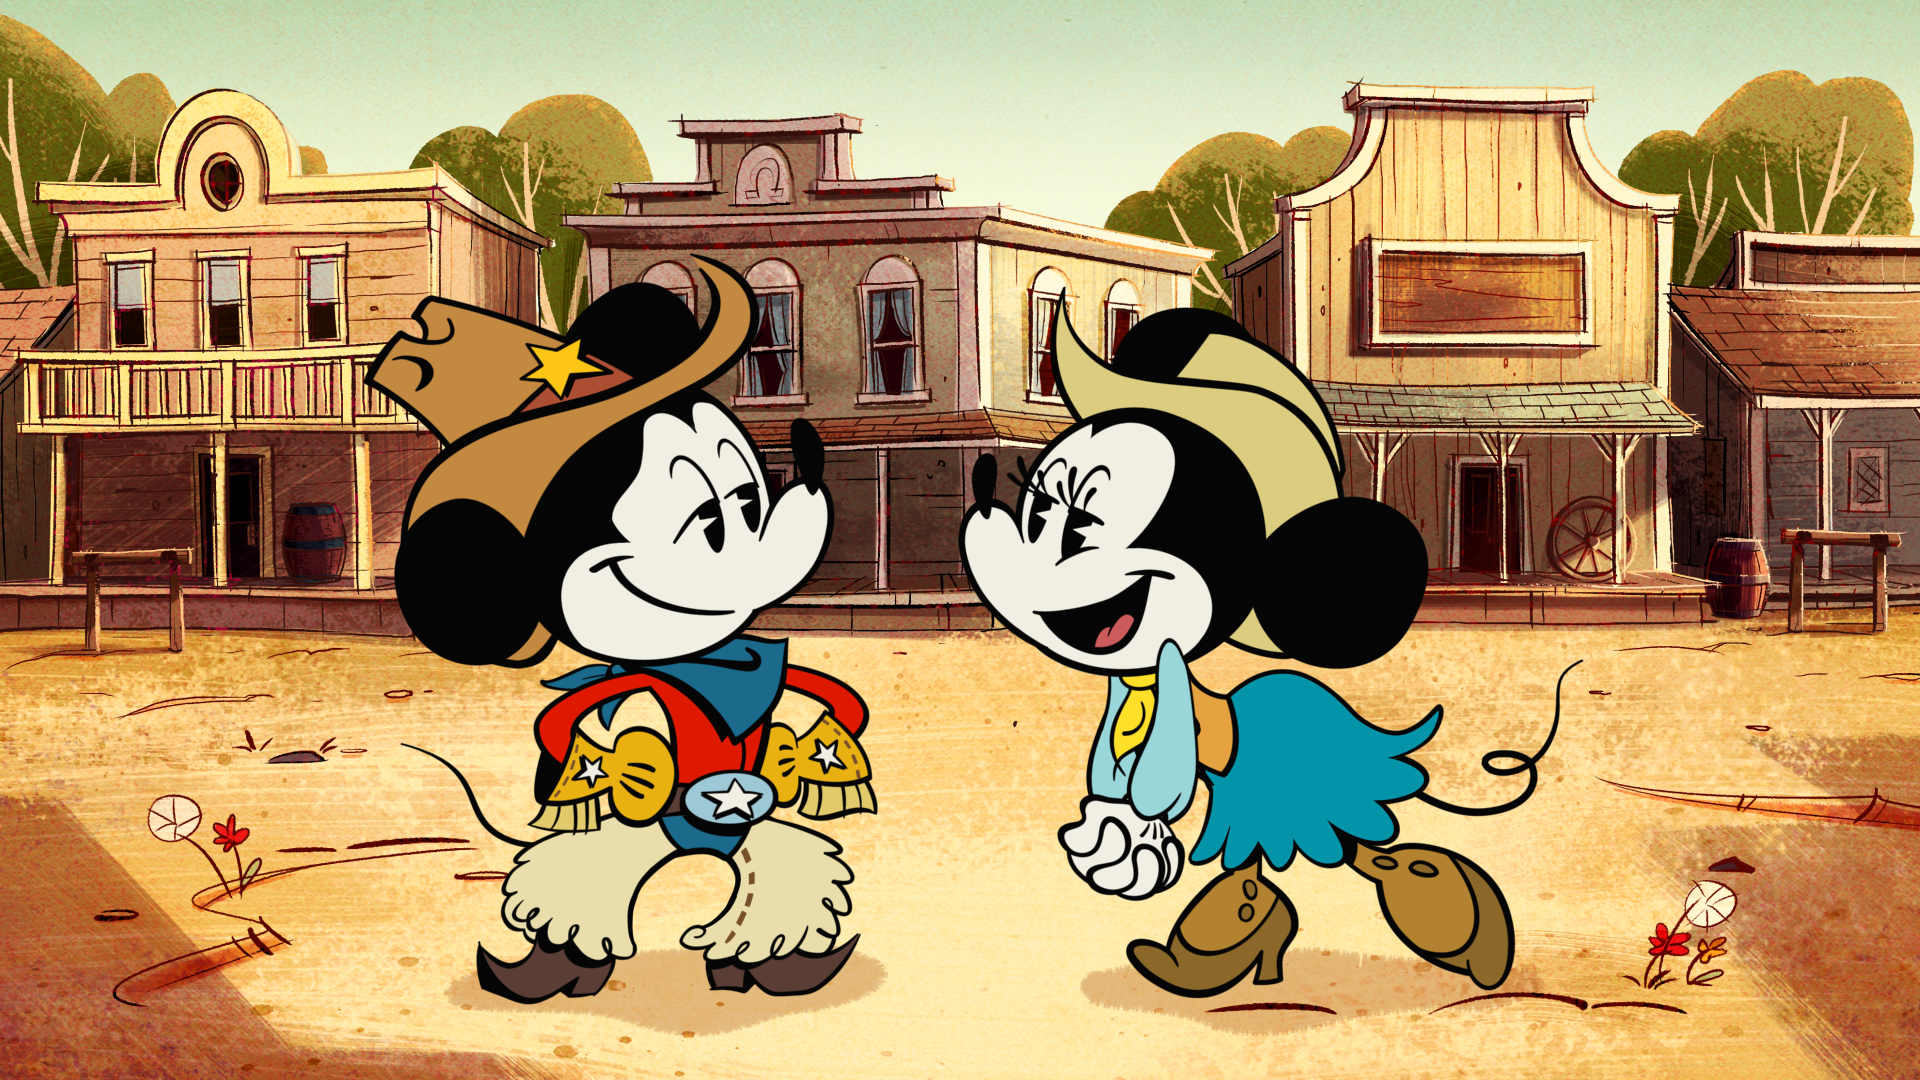 The Wonderful World Of Mickey Mouse Animated Shorts Premiere On Disney+